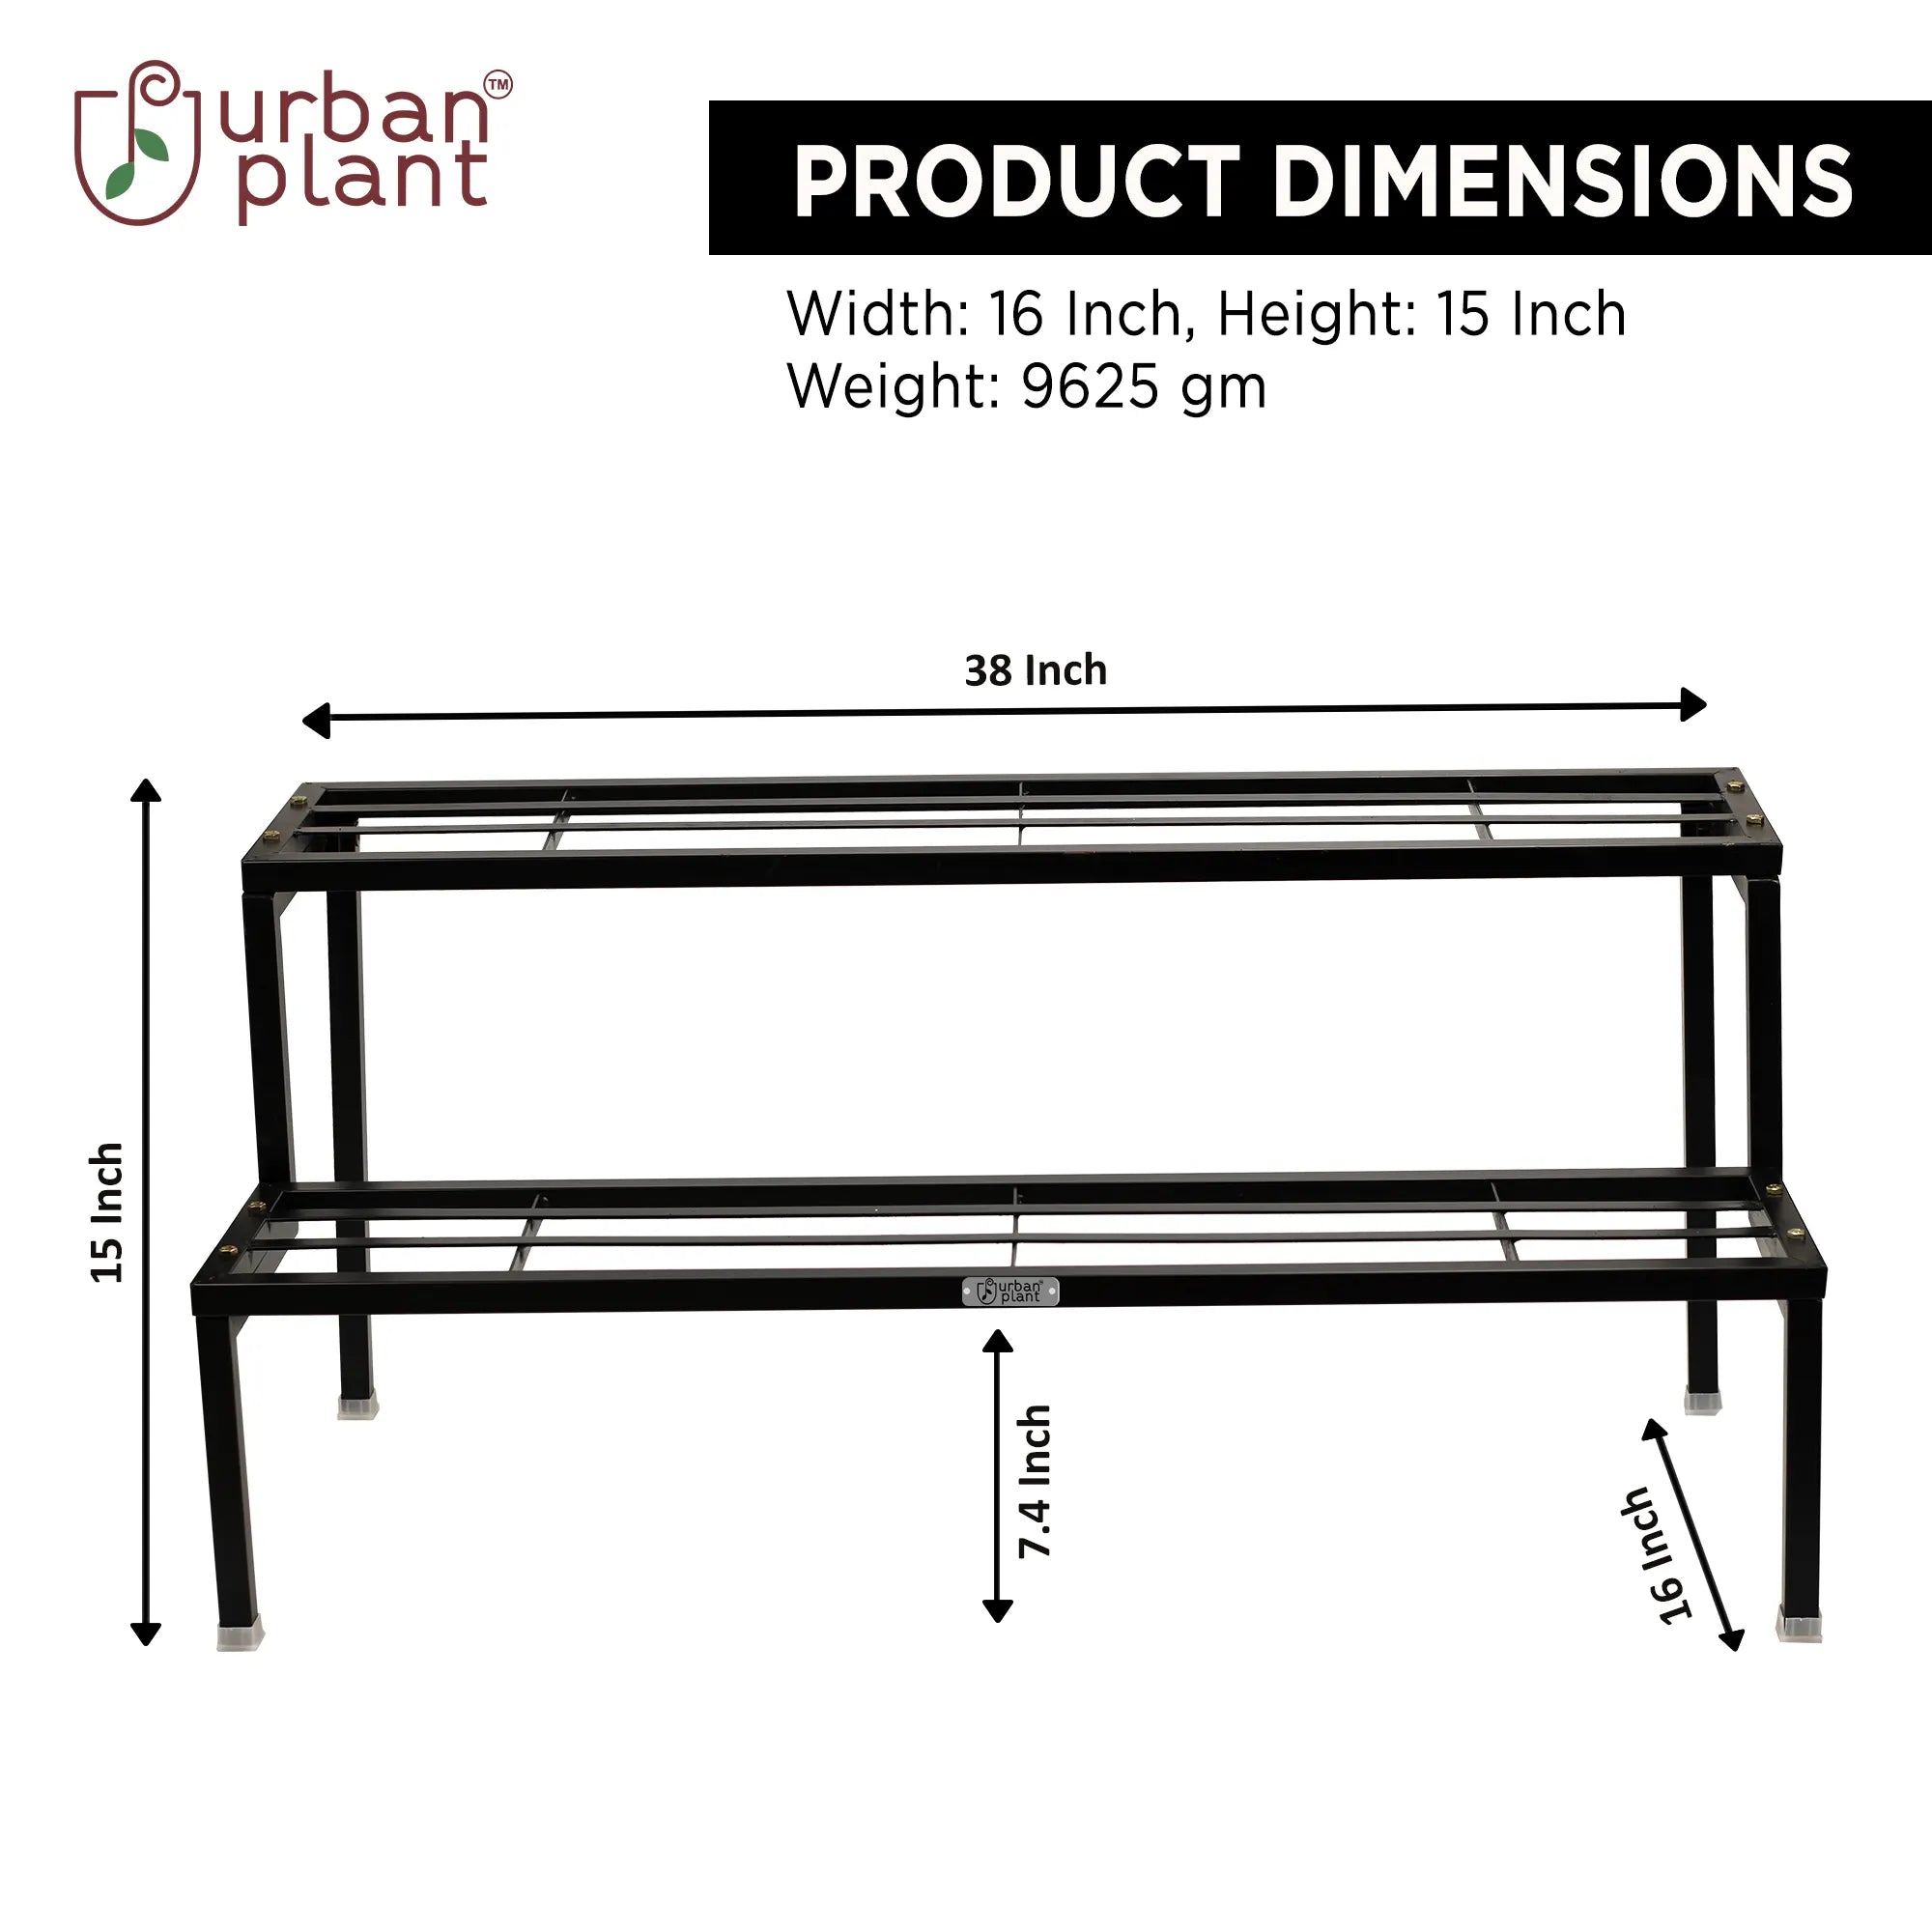 Heavy Duty 2 Step Planter Pot Stand- Best Outdoor & Indoor Garden Stand (Easy Assembly) Planter Stand Urban Plant 